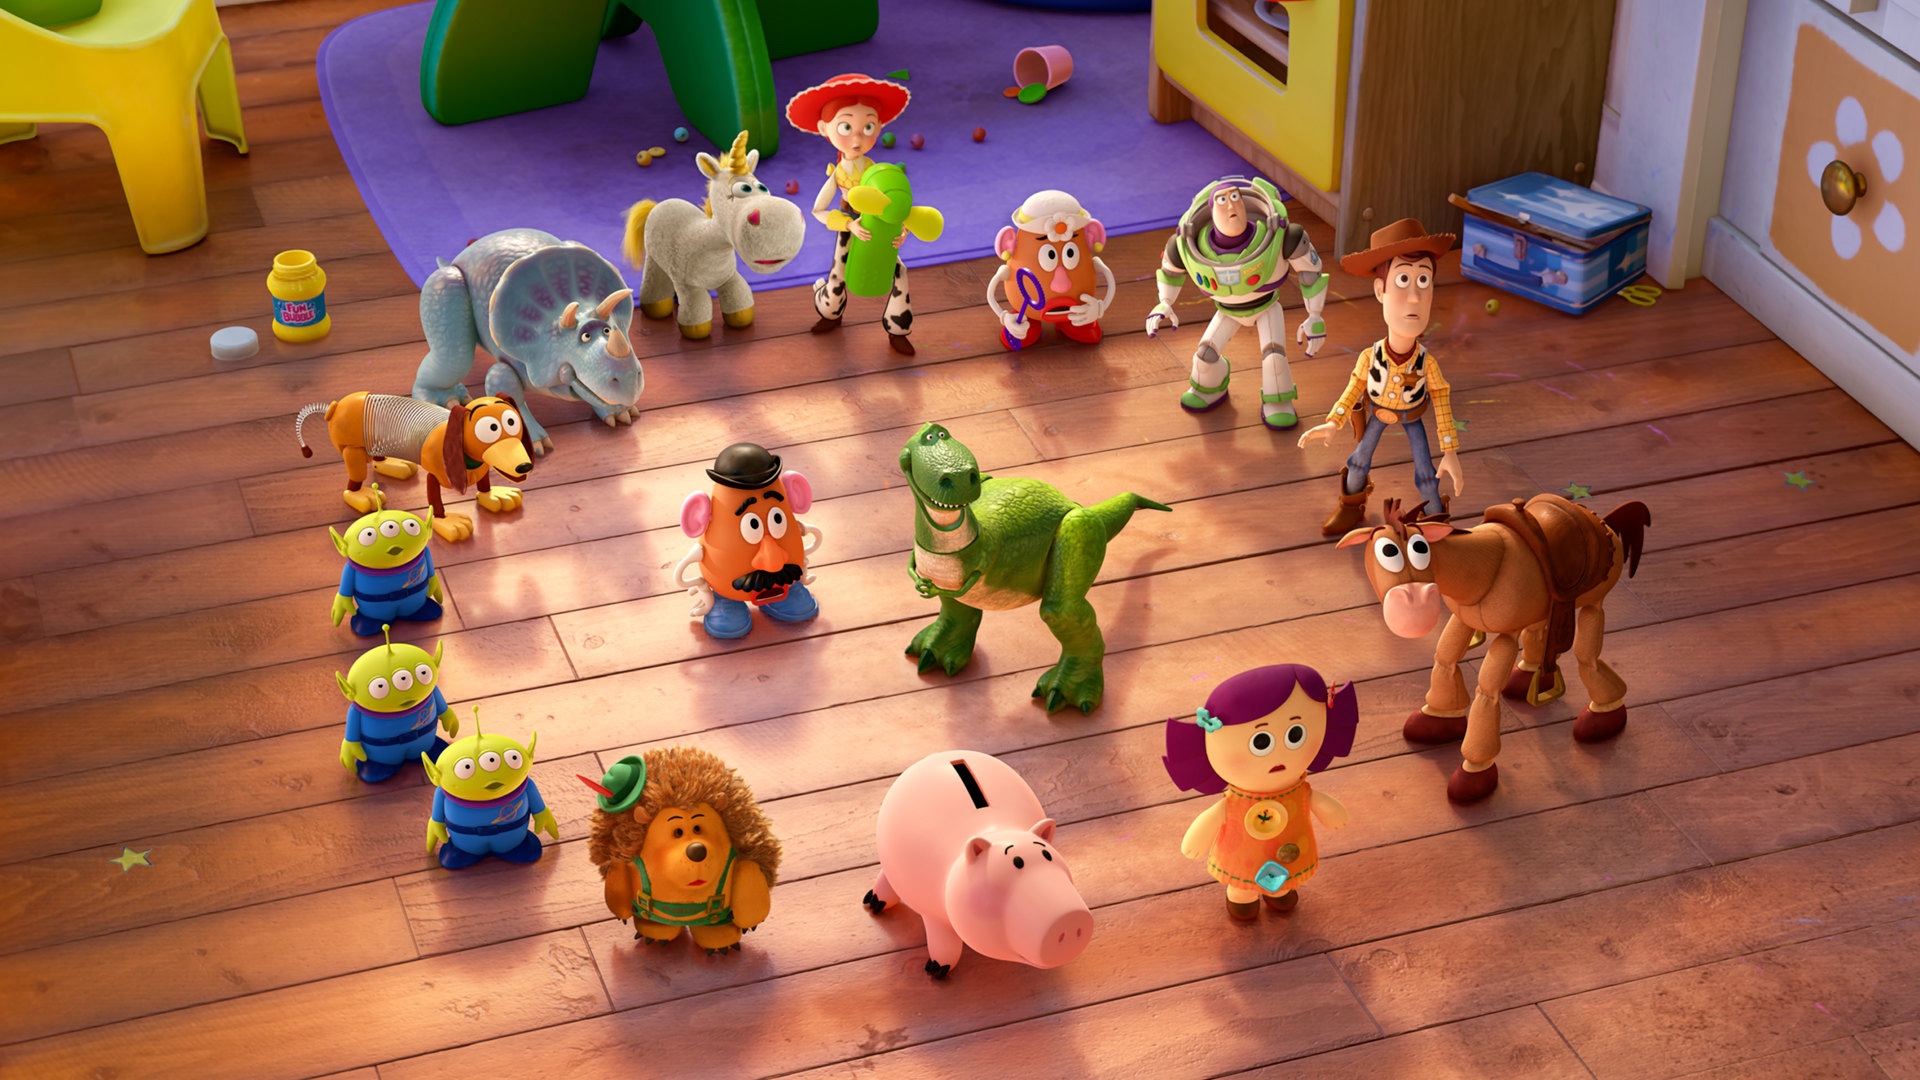 Toy story 1 2 3 wallpapers hd 1920x1080 backgrounds